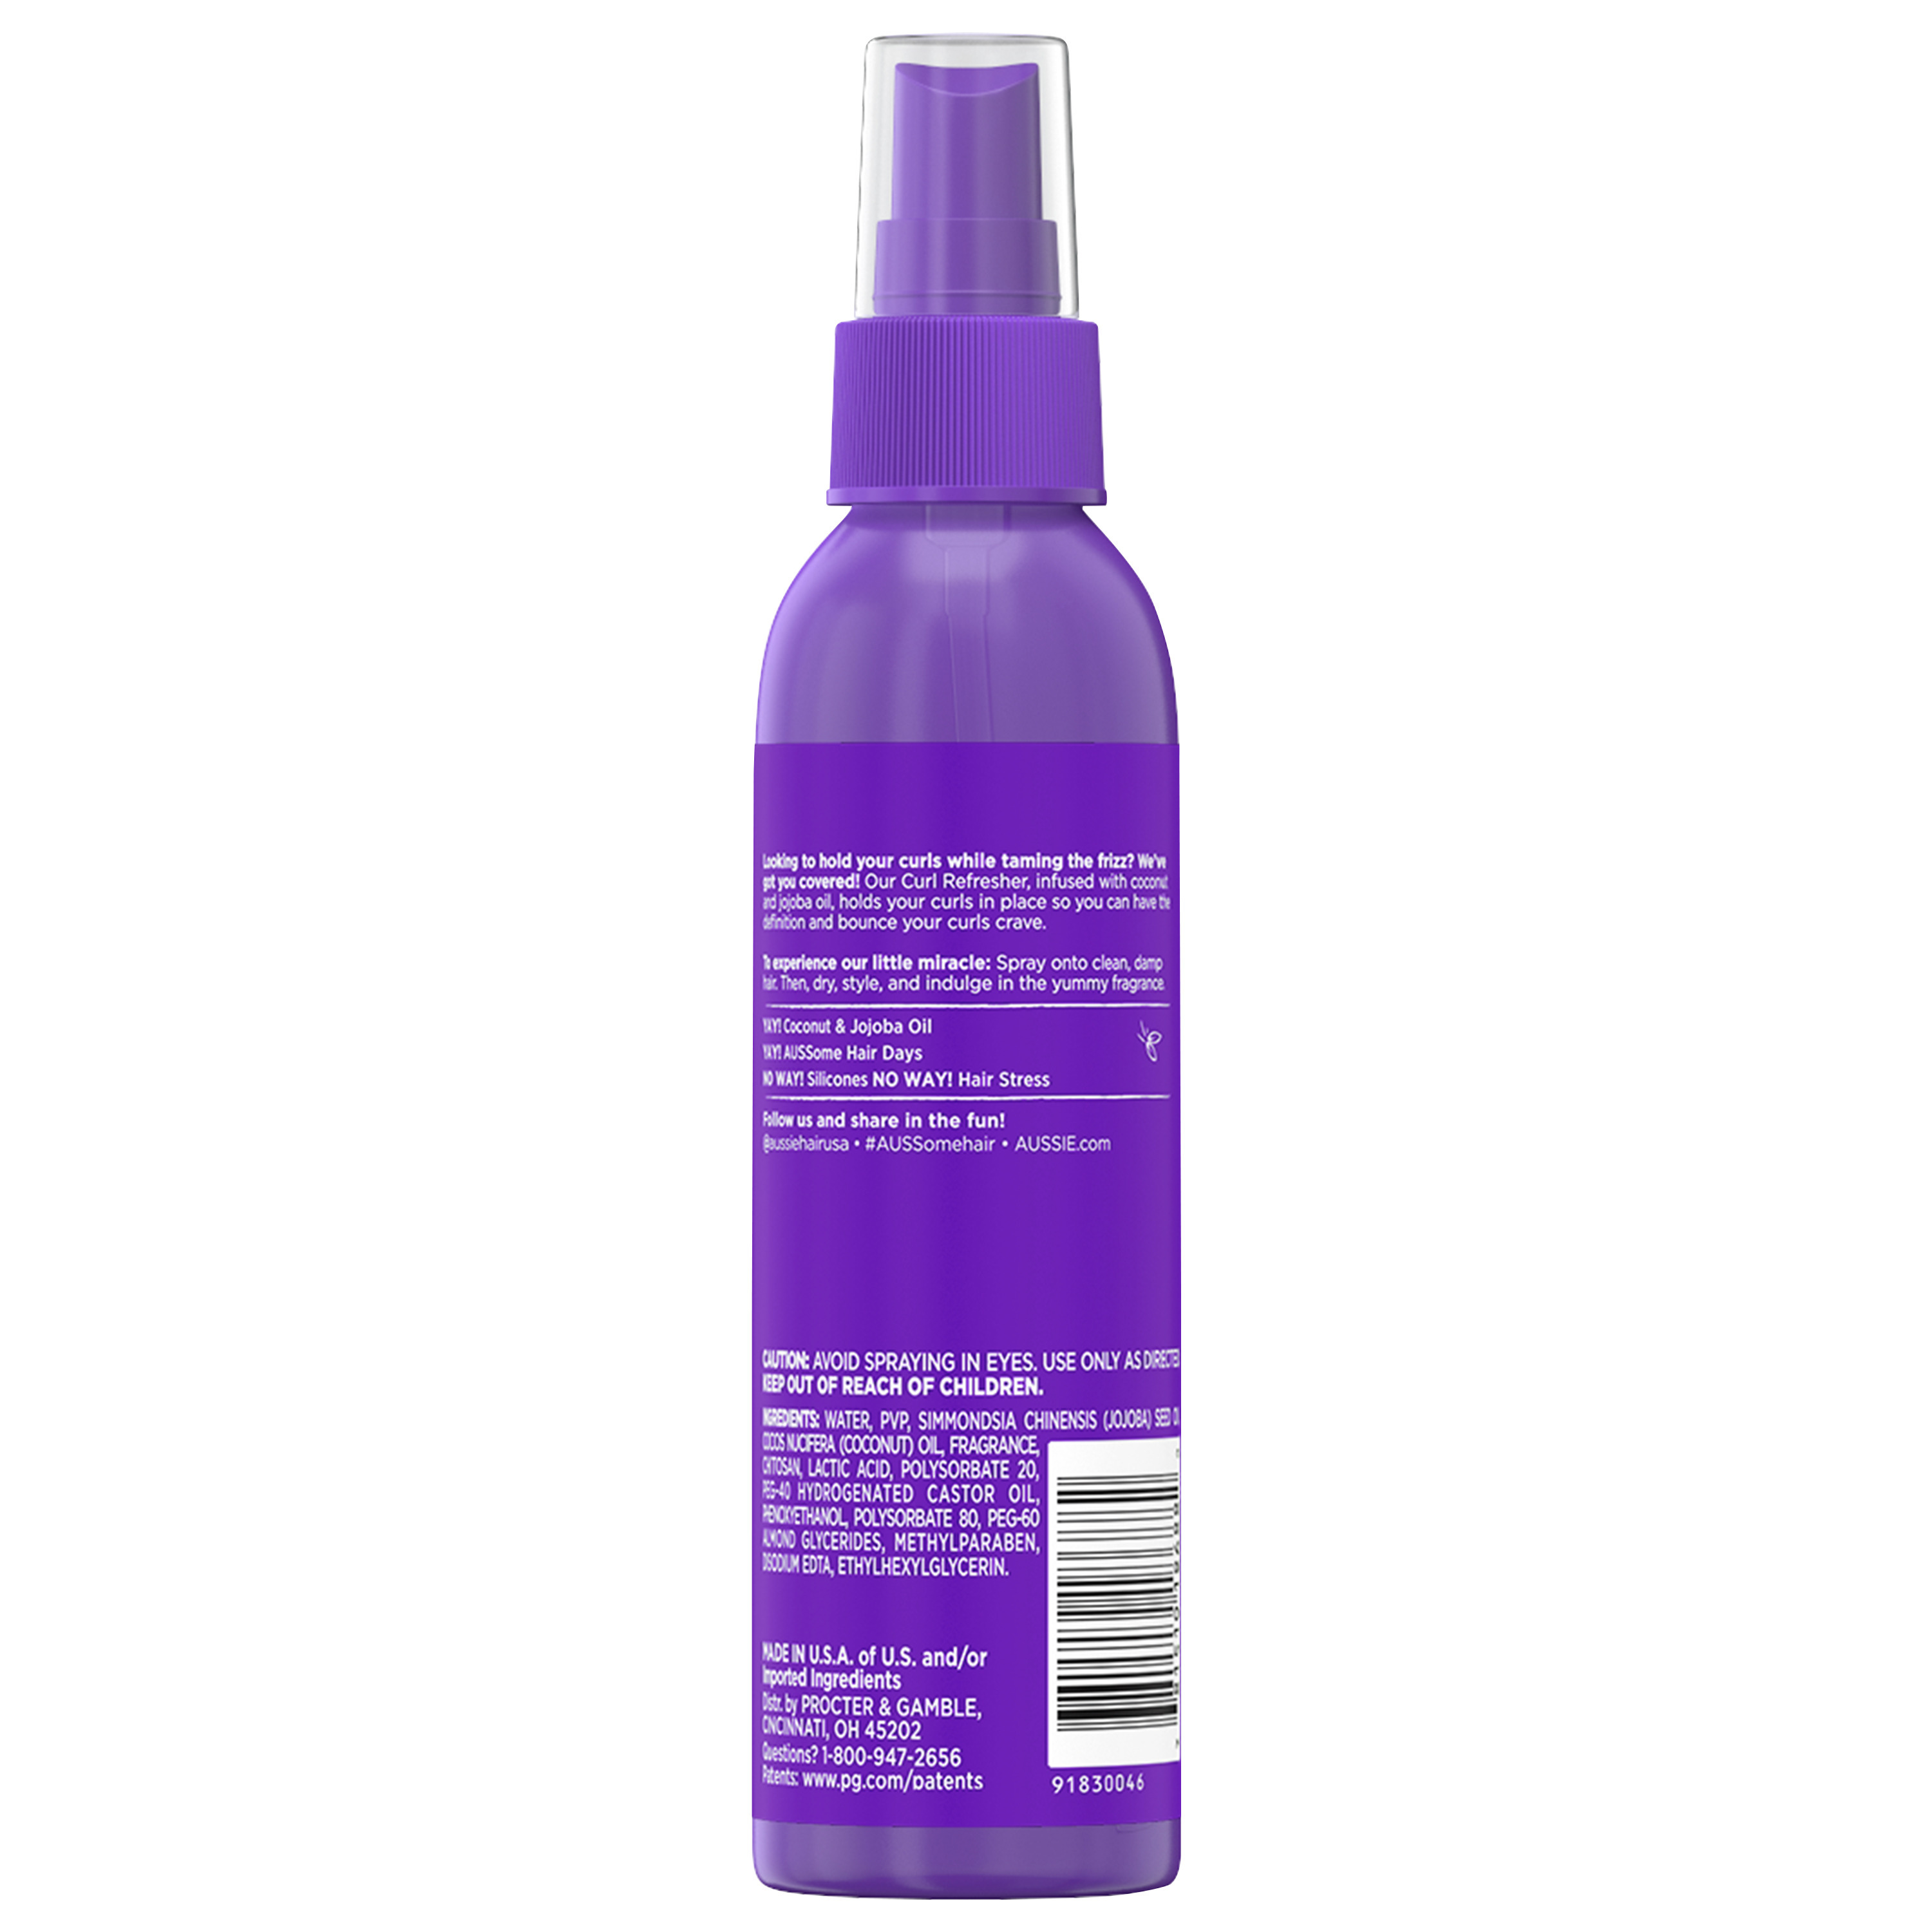 Aussie Miracle Curls Curl Refresher Spray Gel, Max Hold, for All Hair Types 5.7 fl oz - image 3 of 10